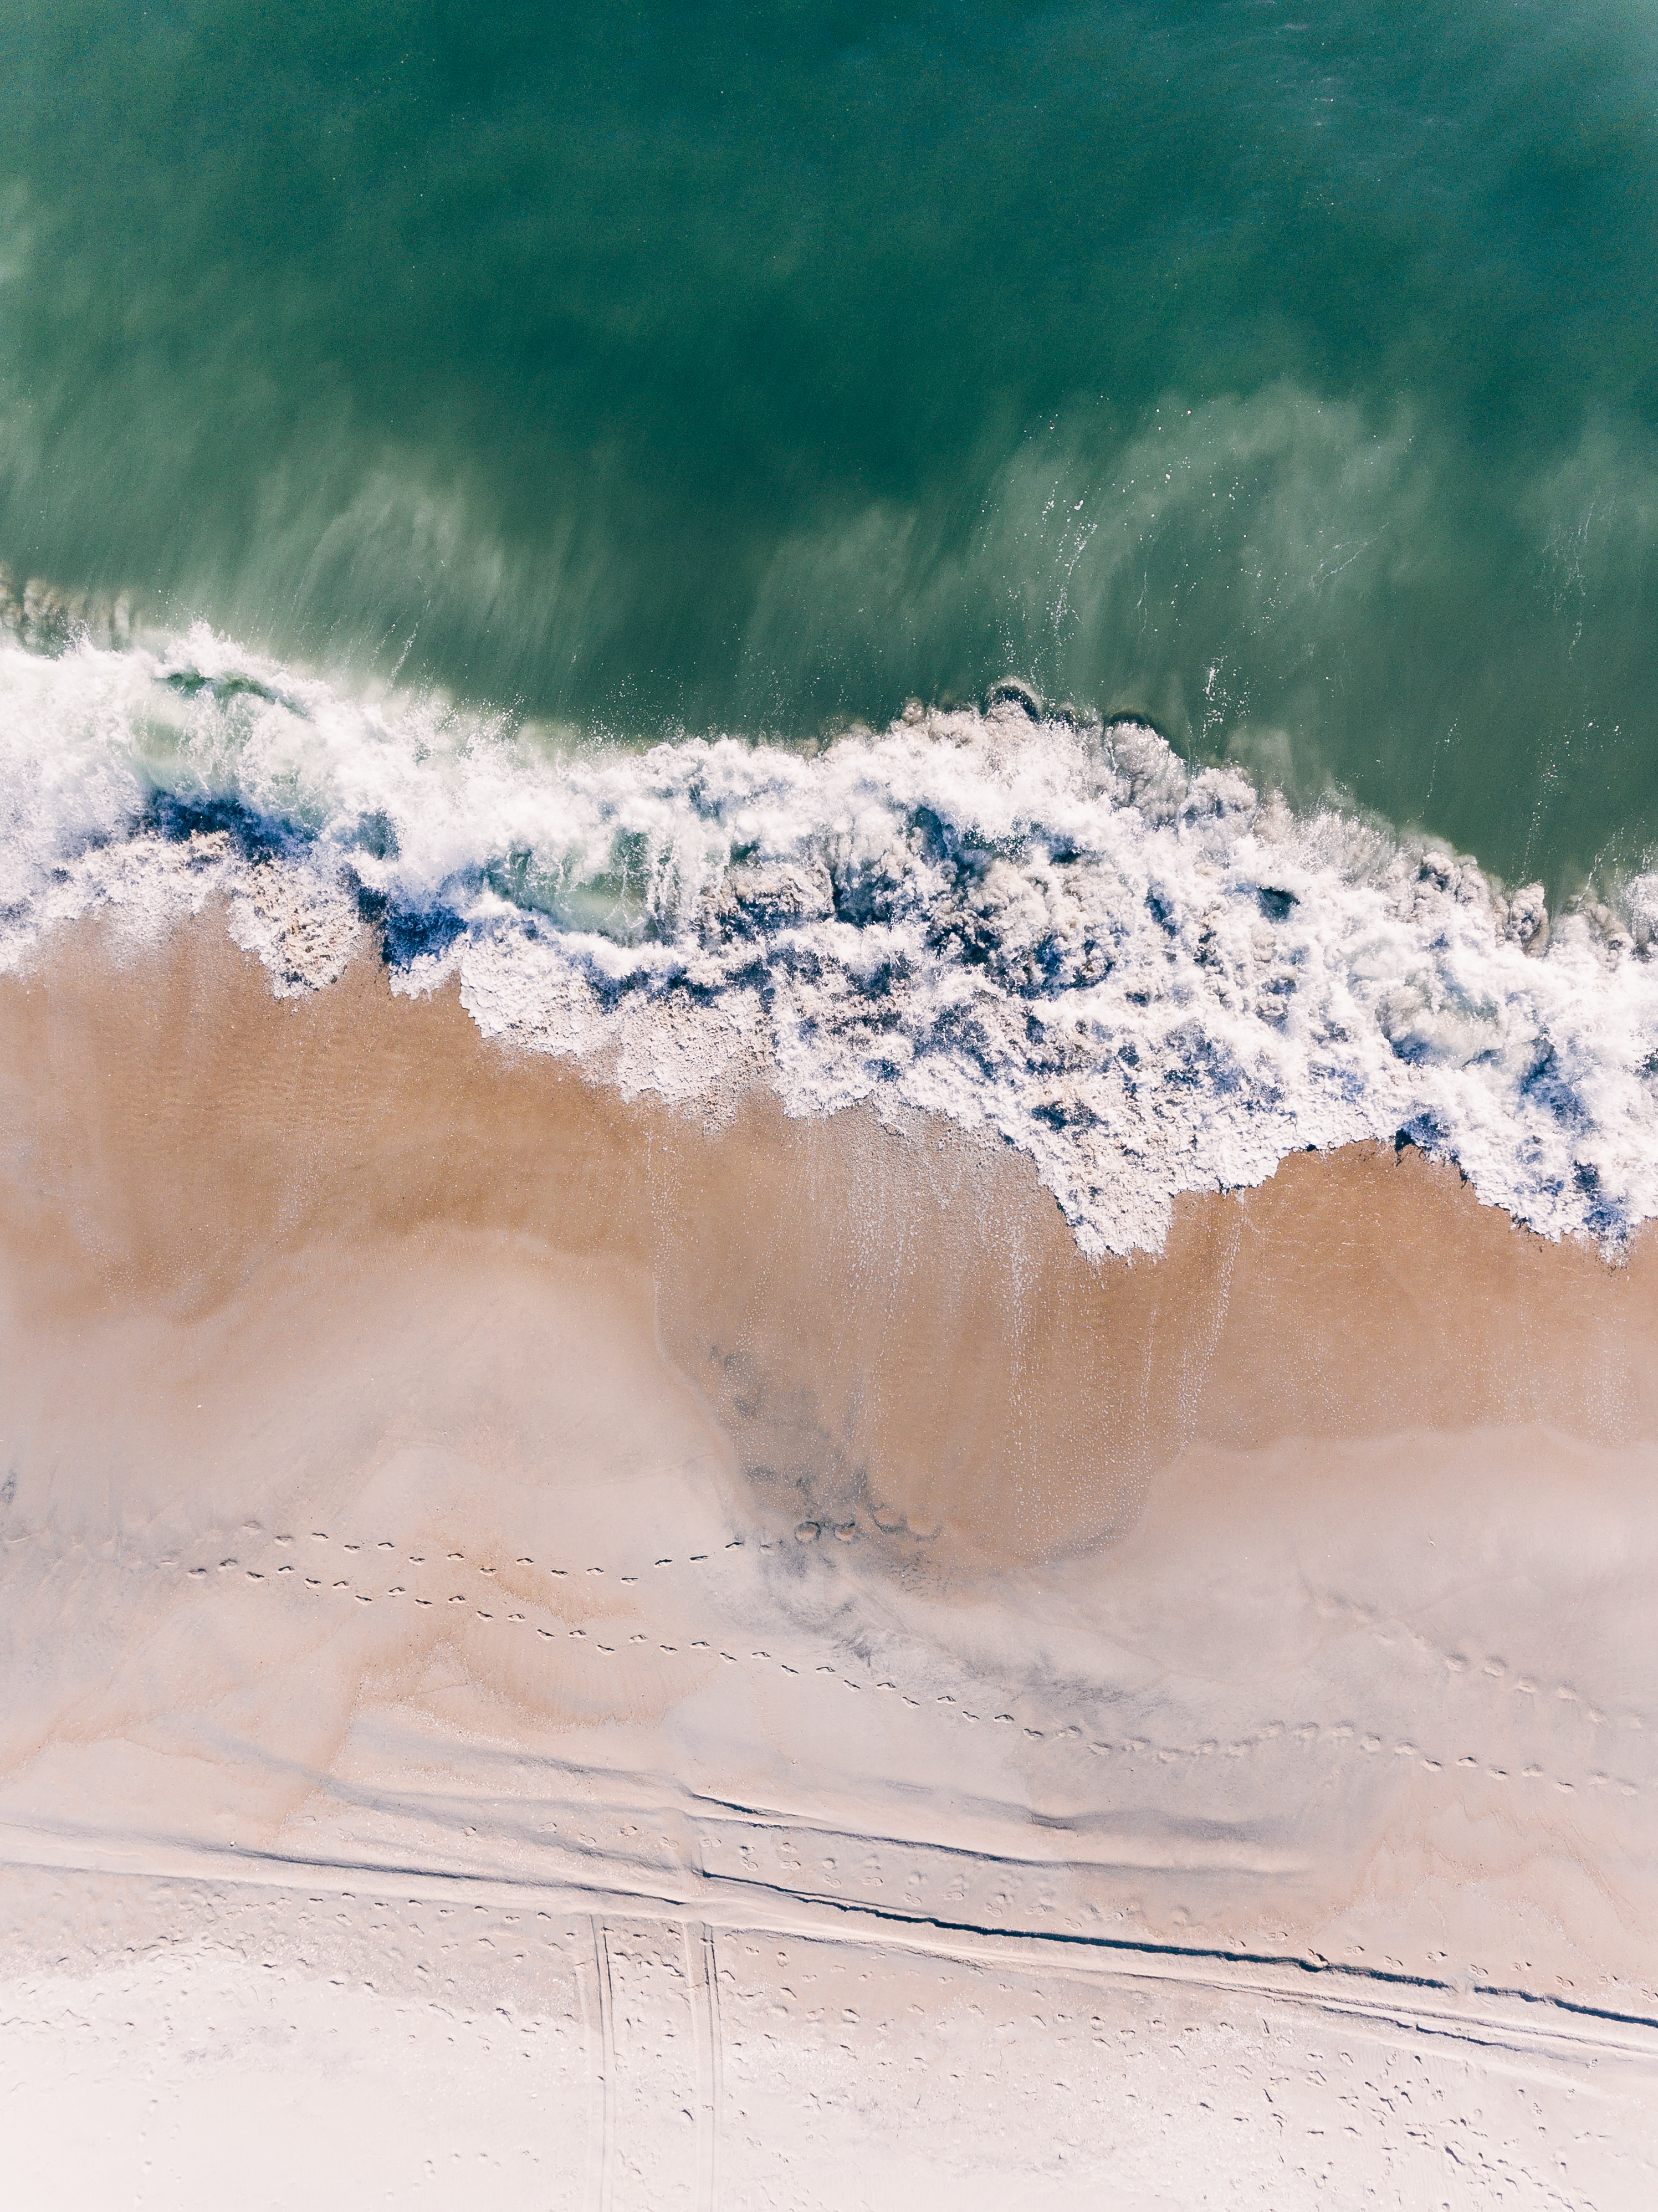 nature, surf, sand, view from above, ocean, wave